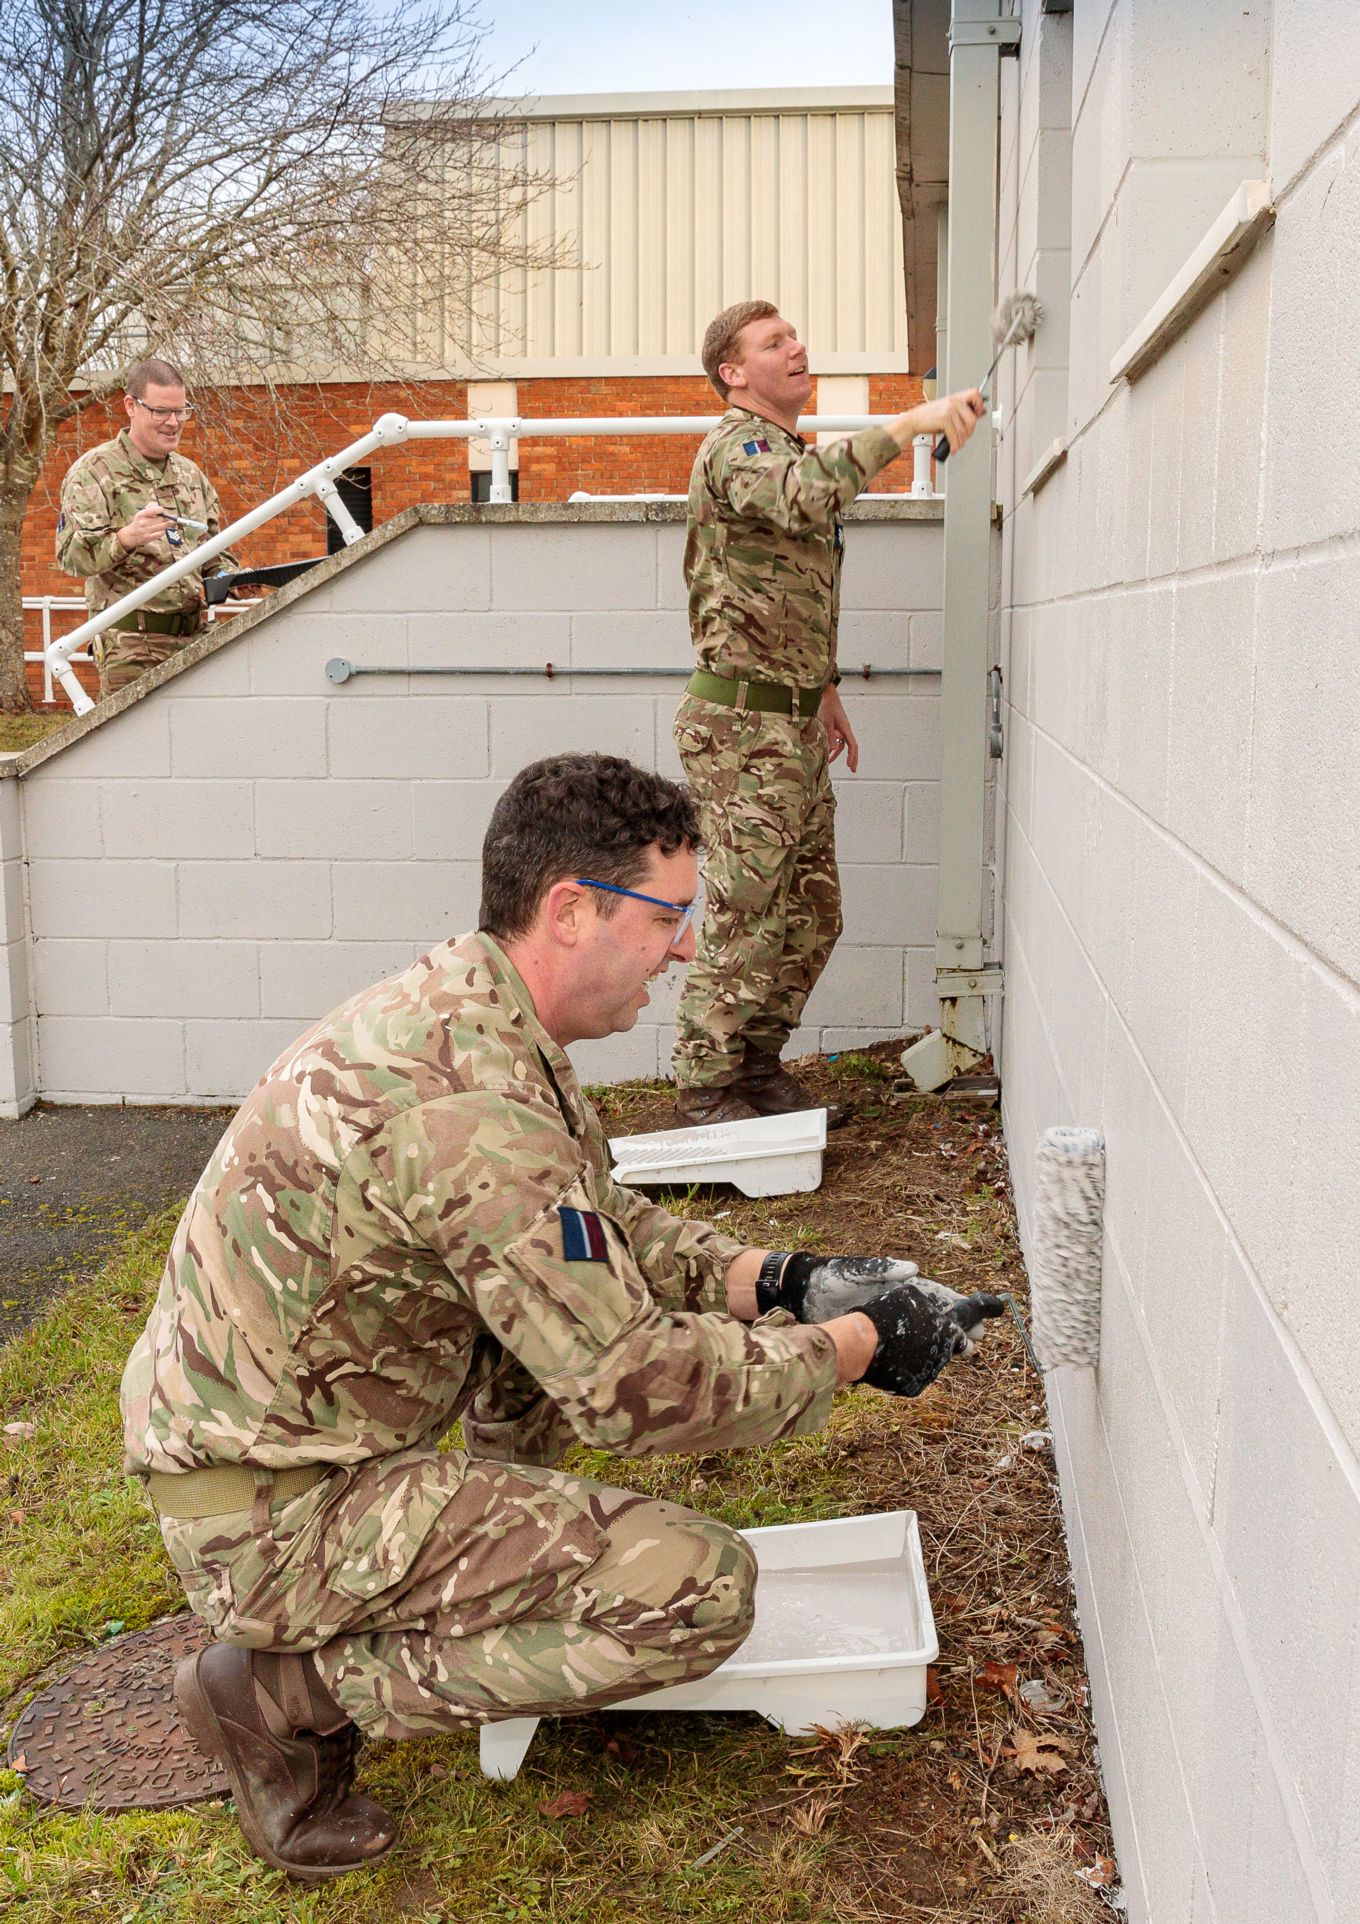 Sergeant Rogers, Sergeant Bannerman and Sergeant Walker painting the outside of the building.